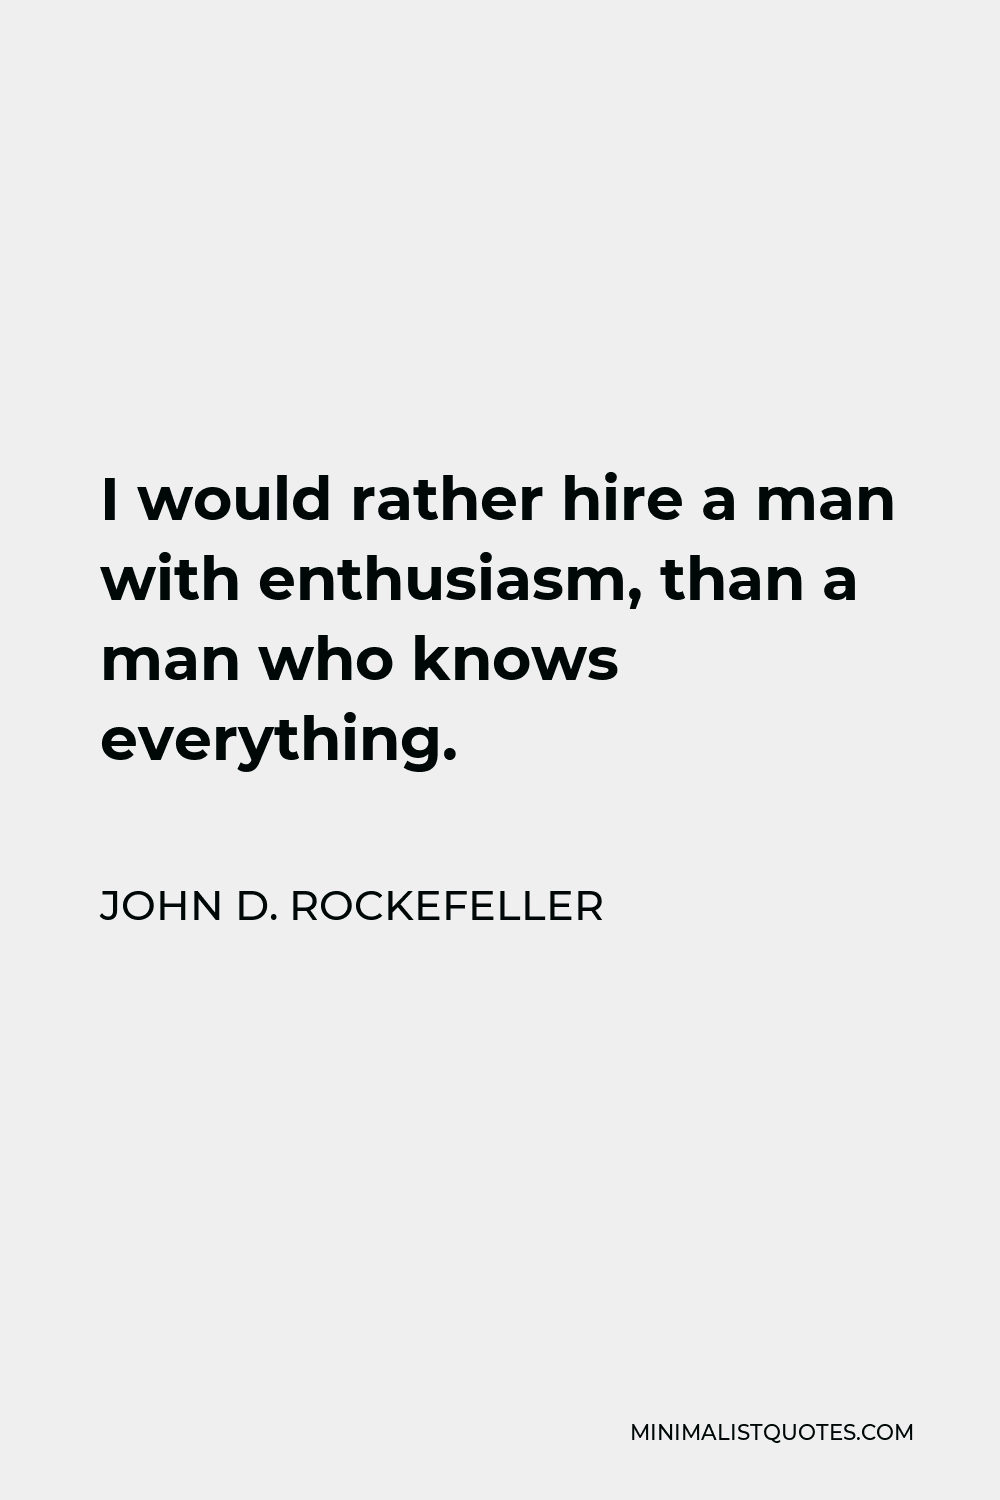 John D. Rockefeller Quote - I would rather hire a man with enthusiasm, than a man who knows everything.